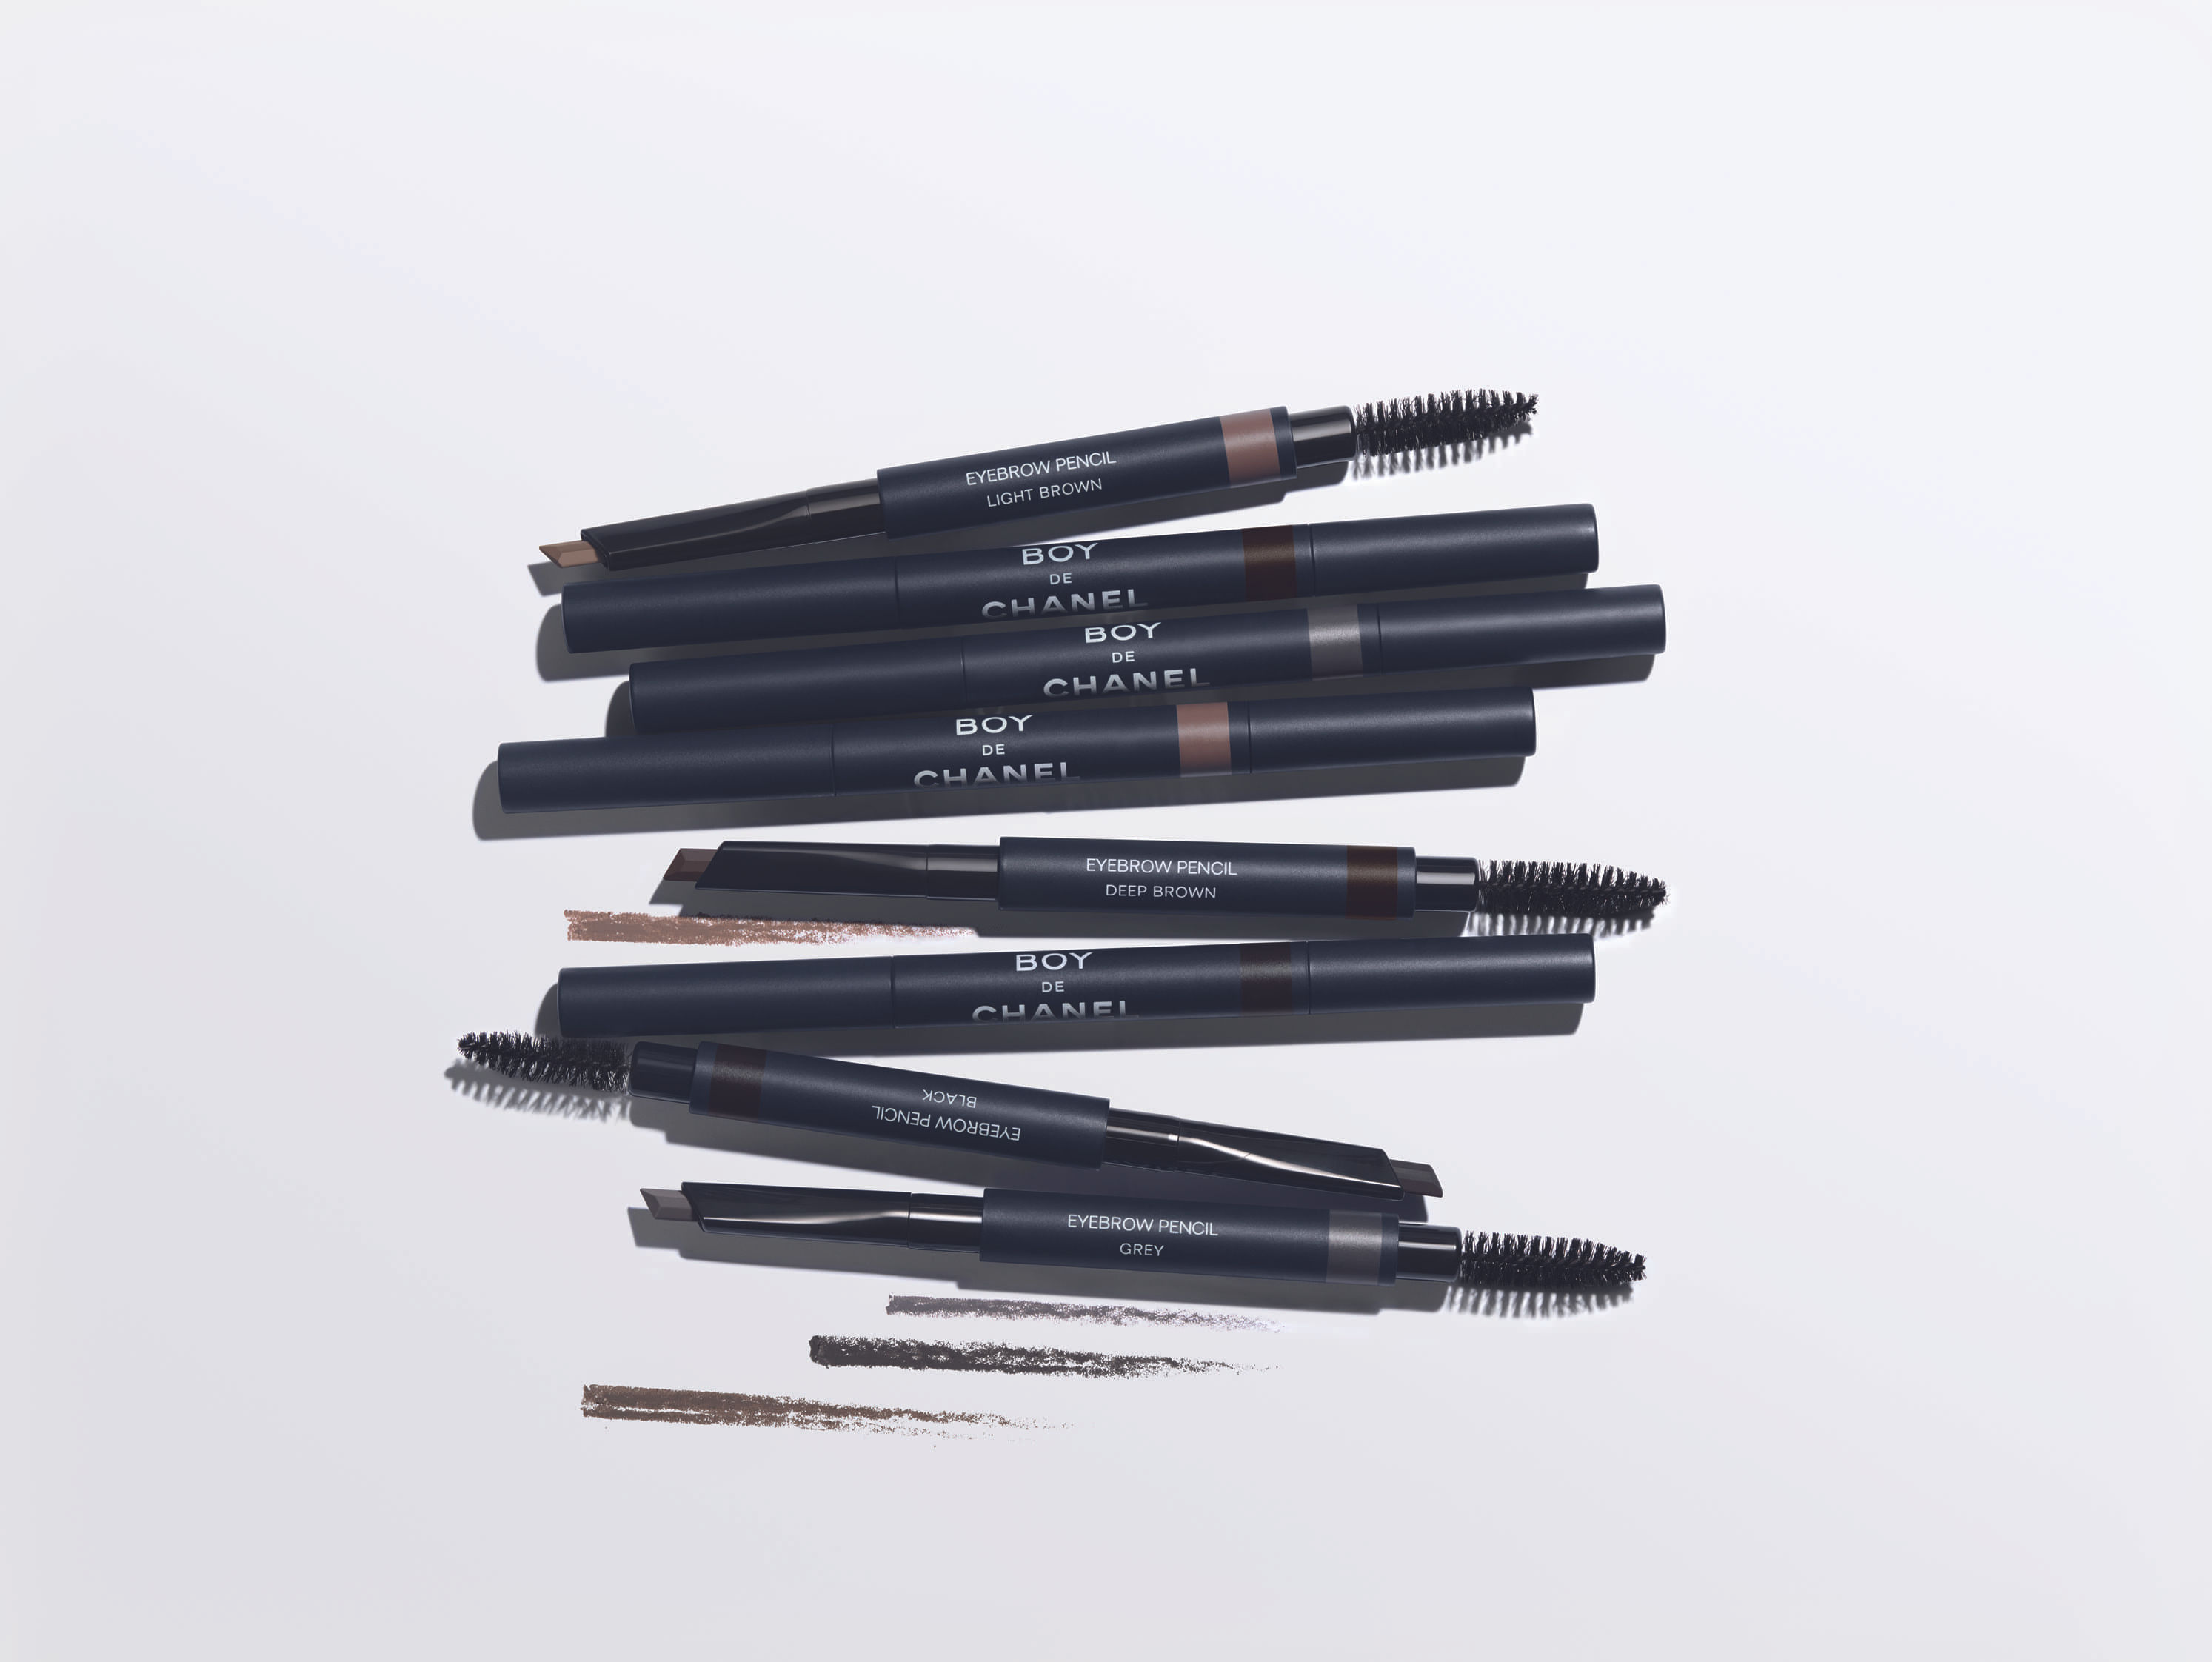 Review: Signature de Chanel Eyeliner Pen and Chanel Stylo Sourcil  Waterproof brow pencil